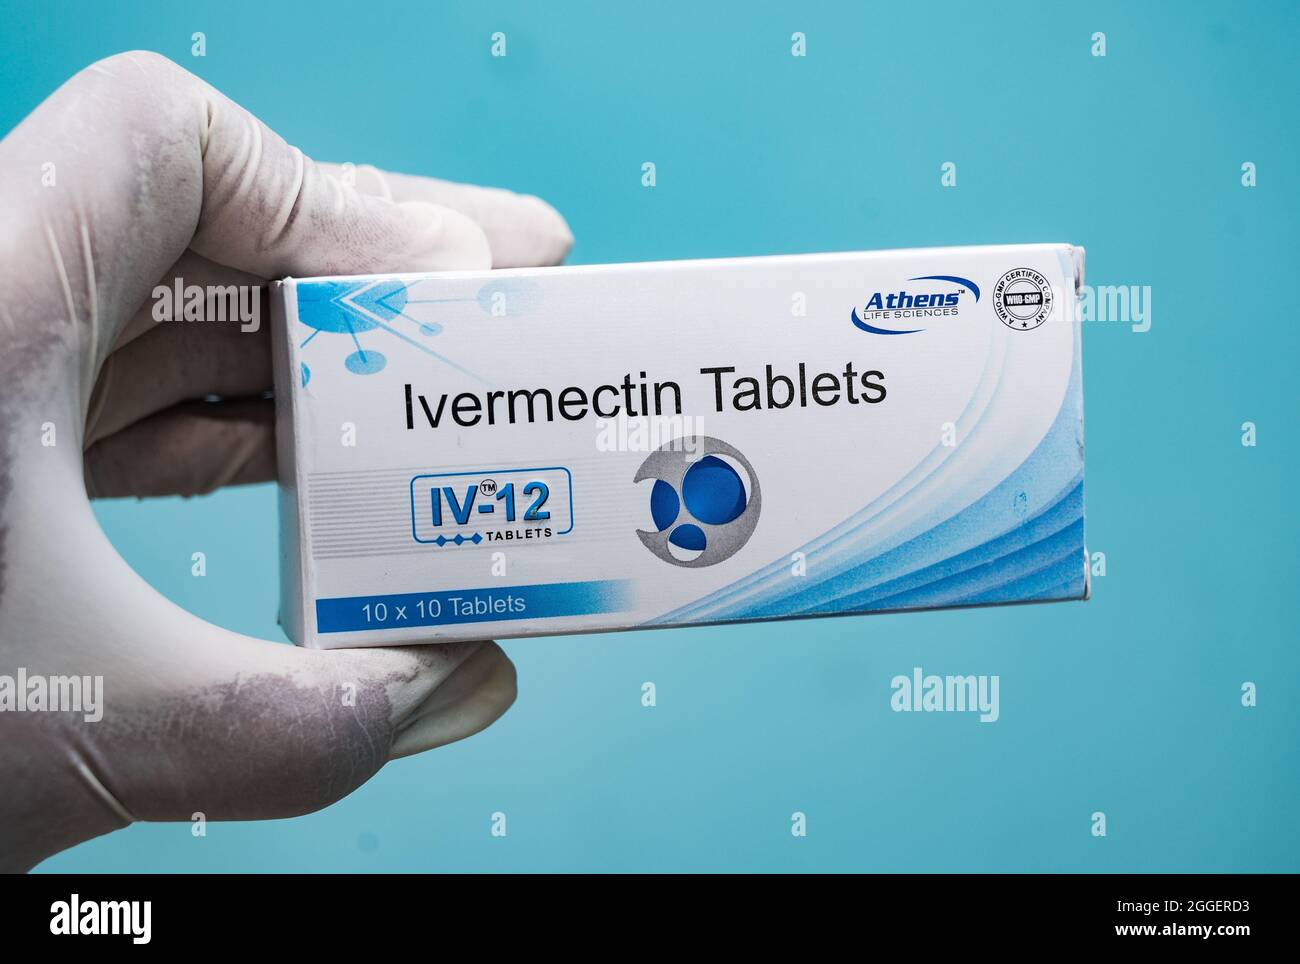 India in ivermectin use Efforts grow